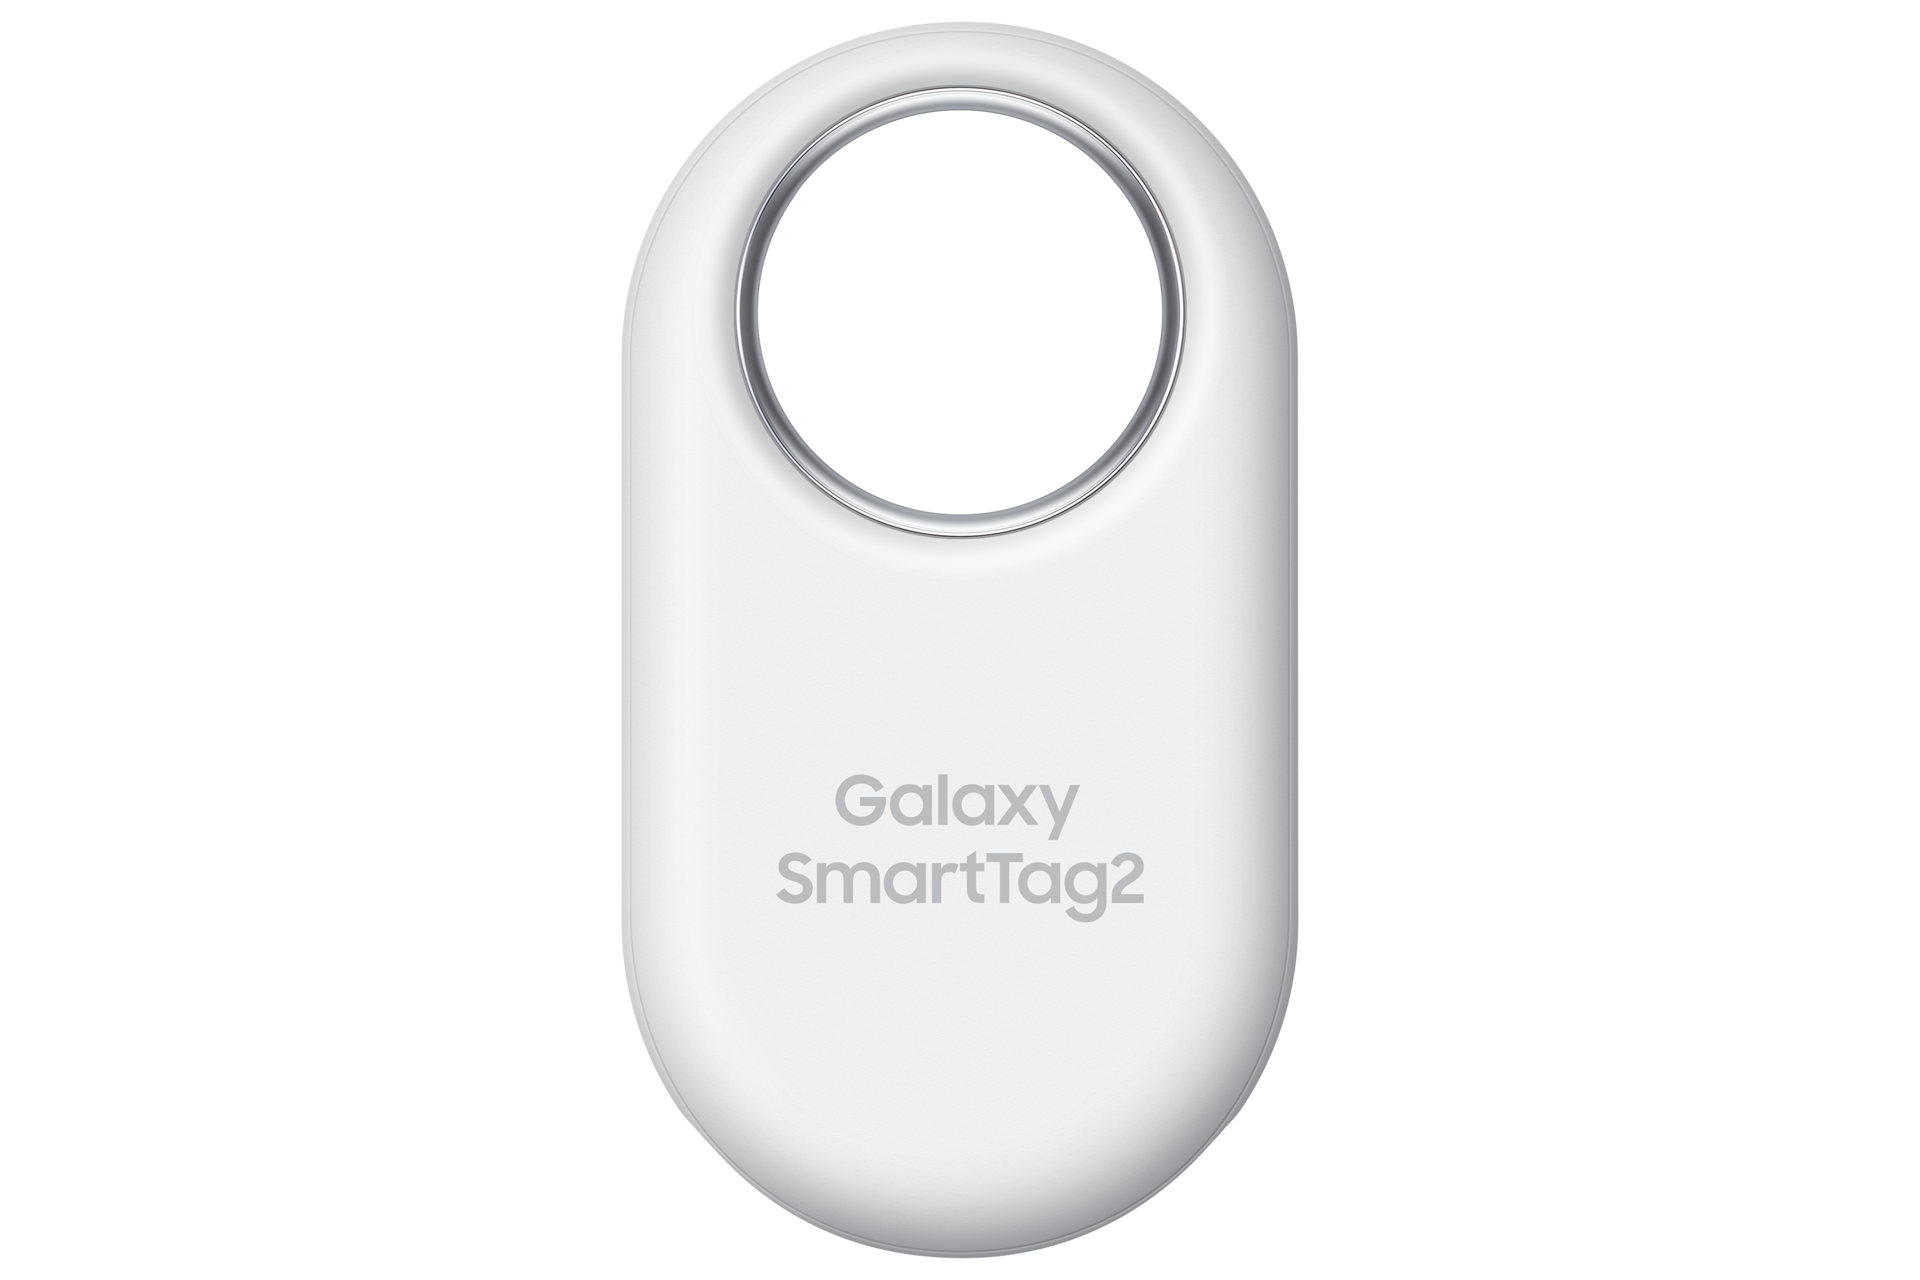 Samsung's AirTag alternatives are coming to Australia this week